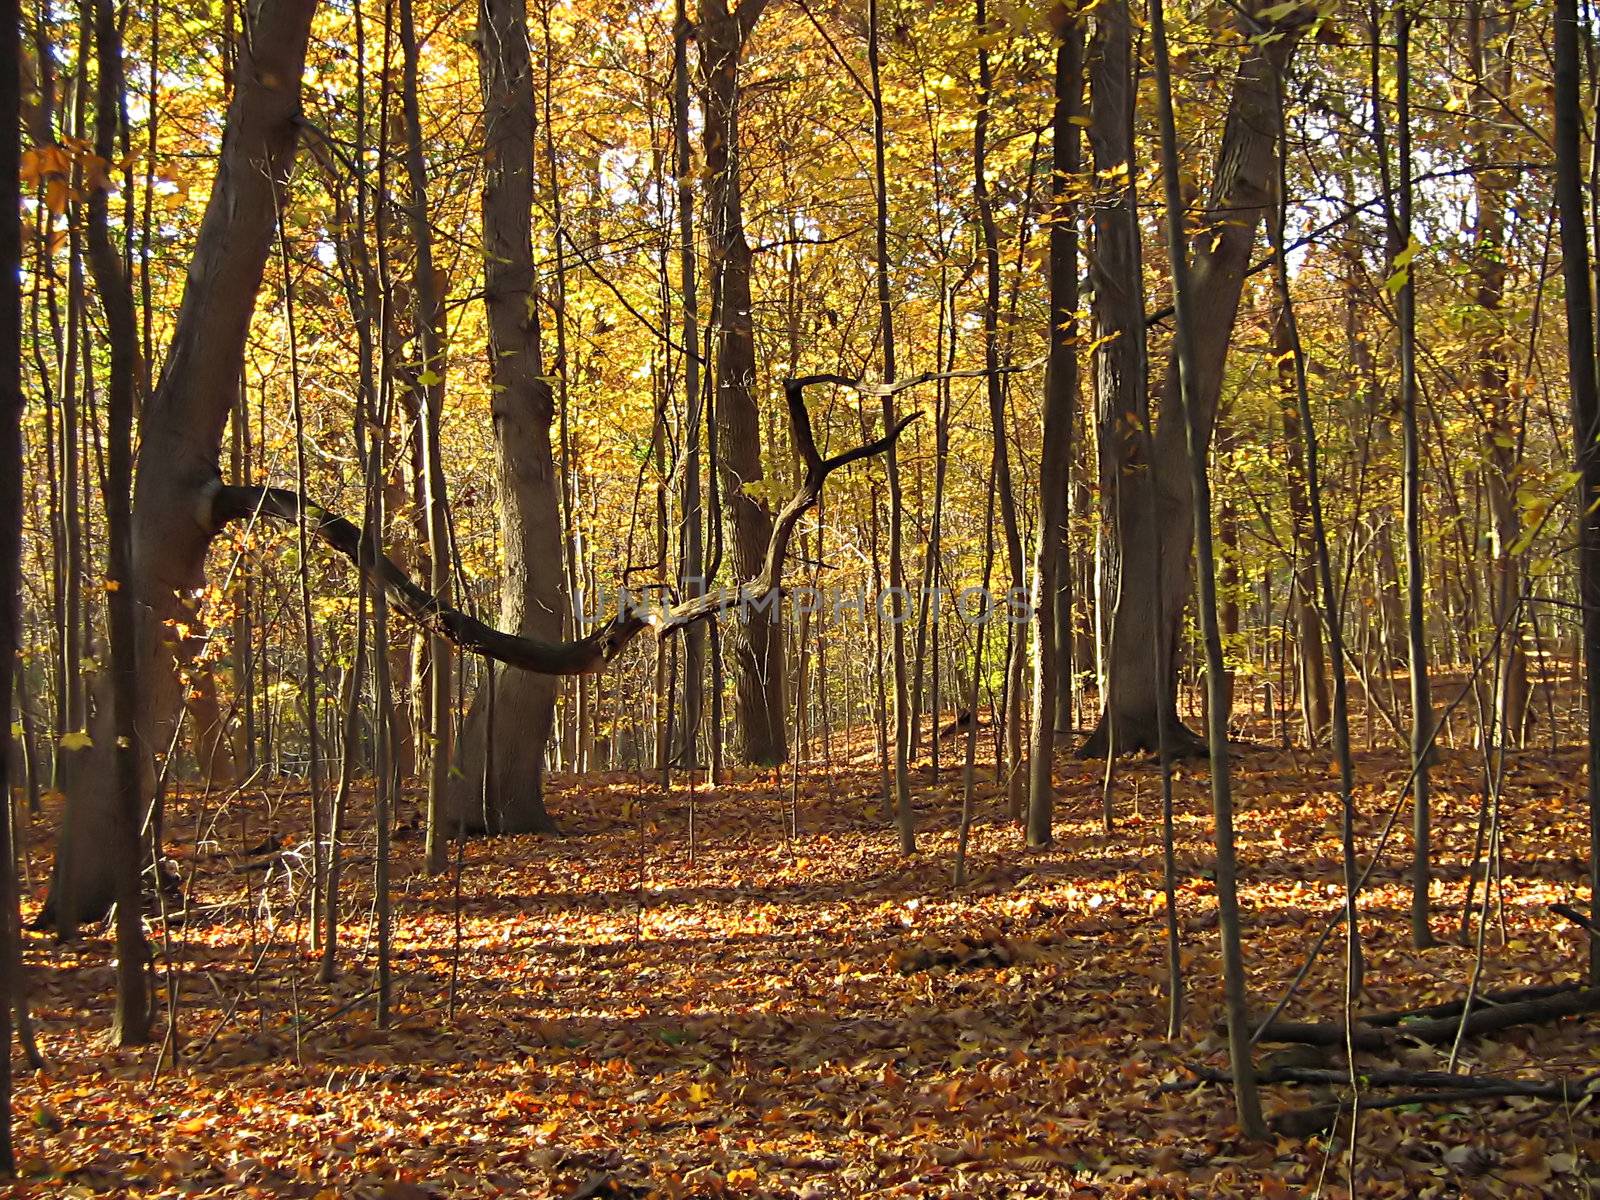 A photograph of a forest in autumn.